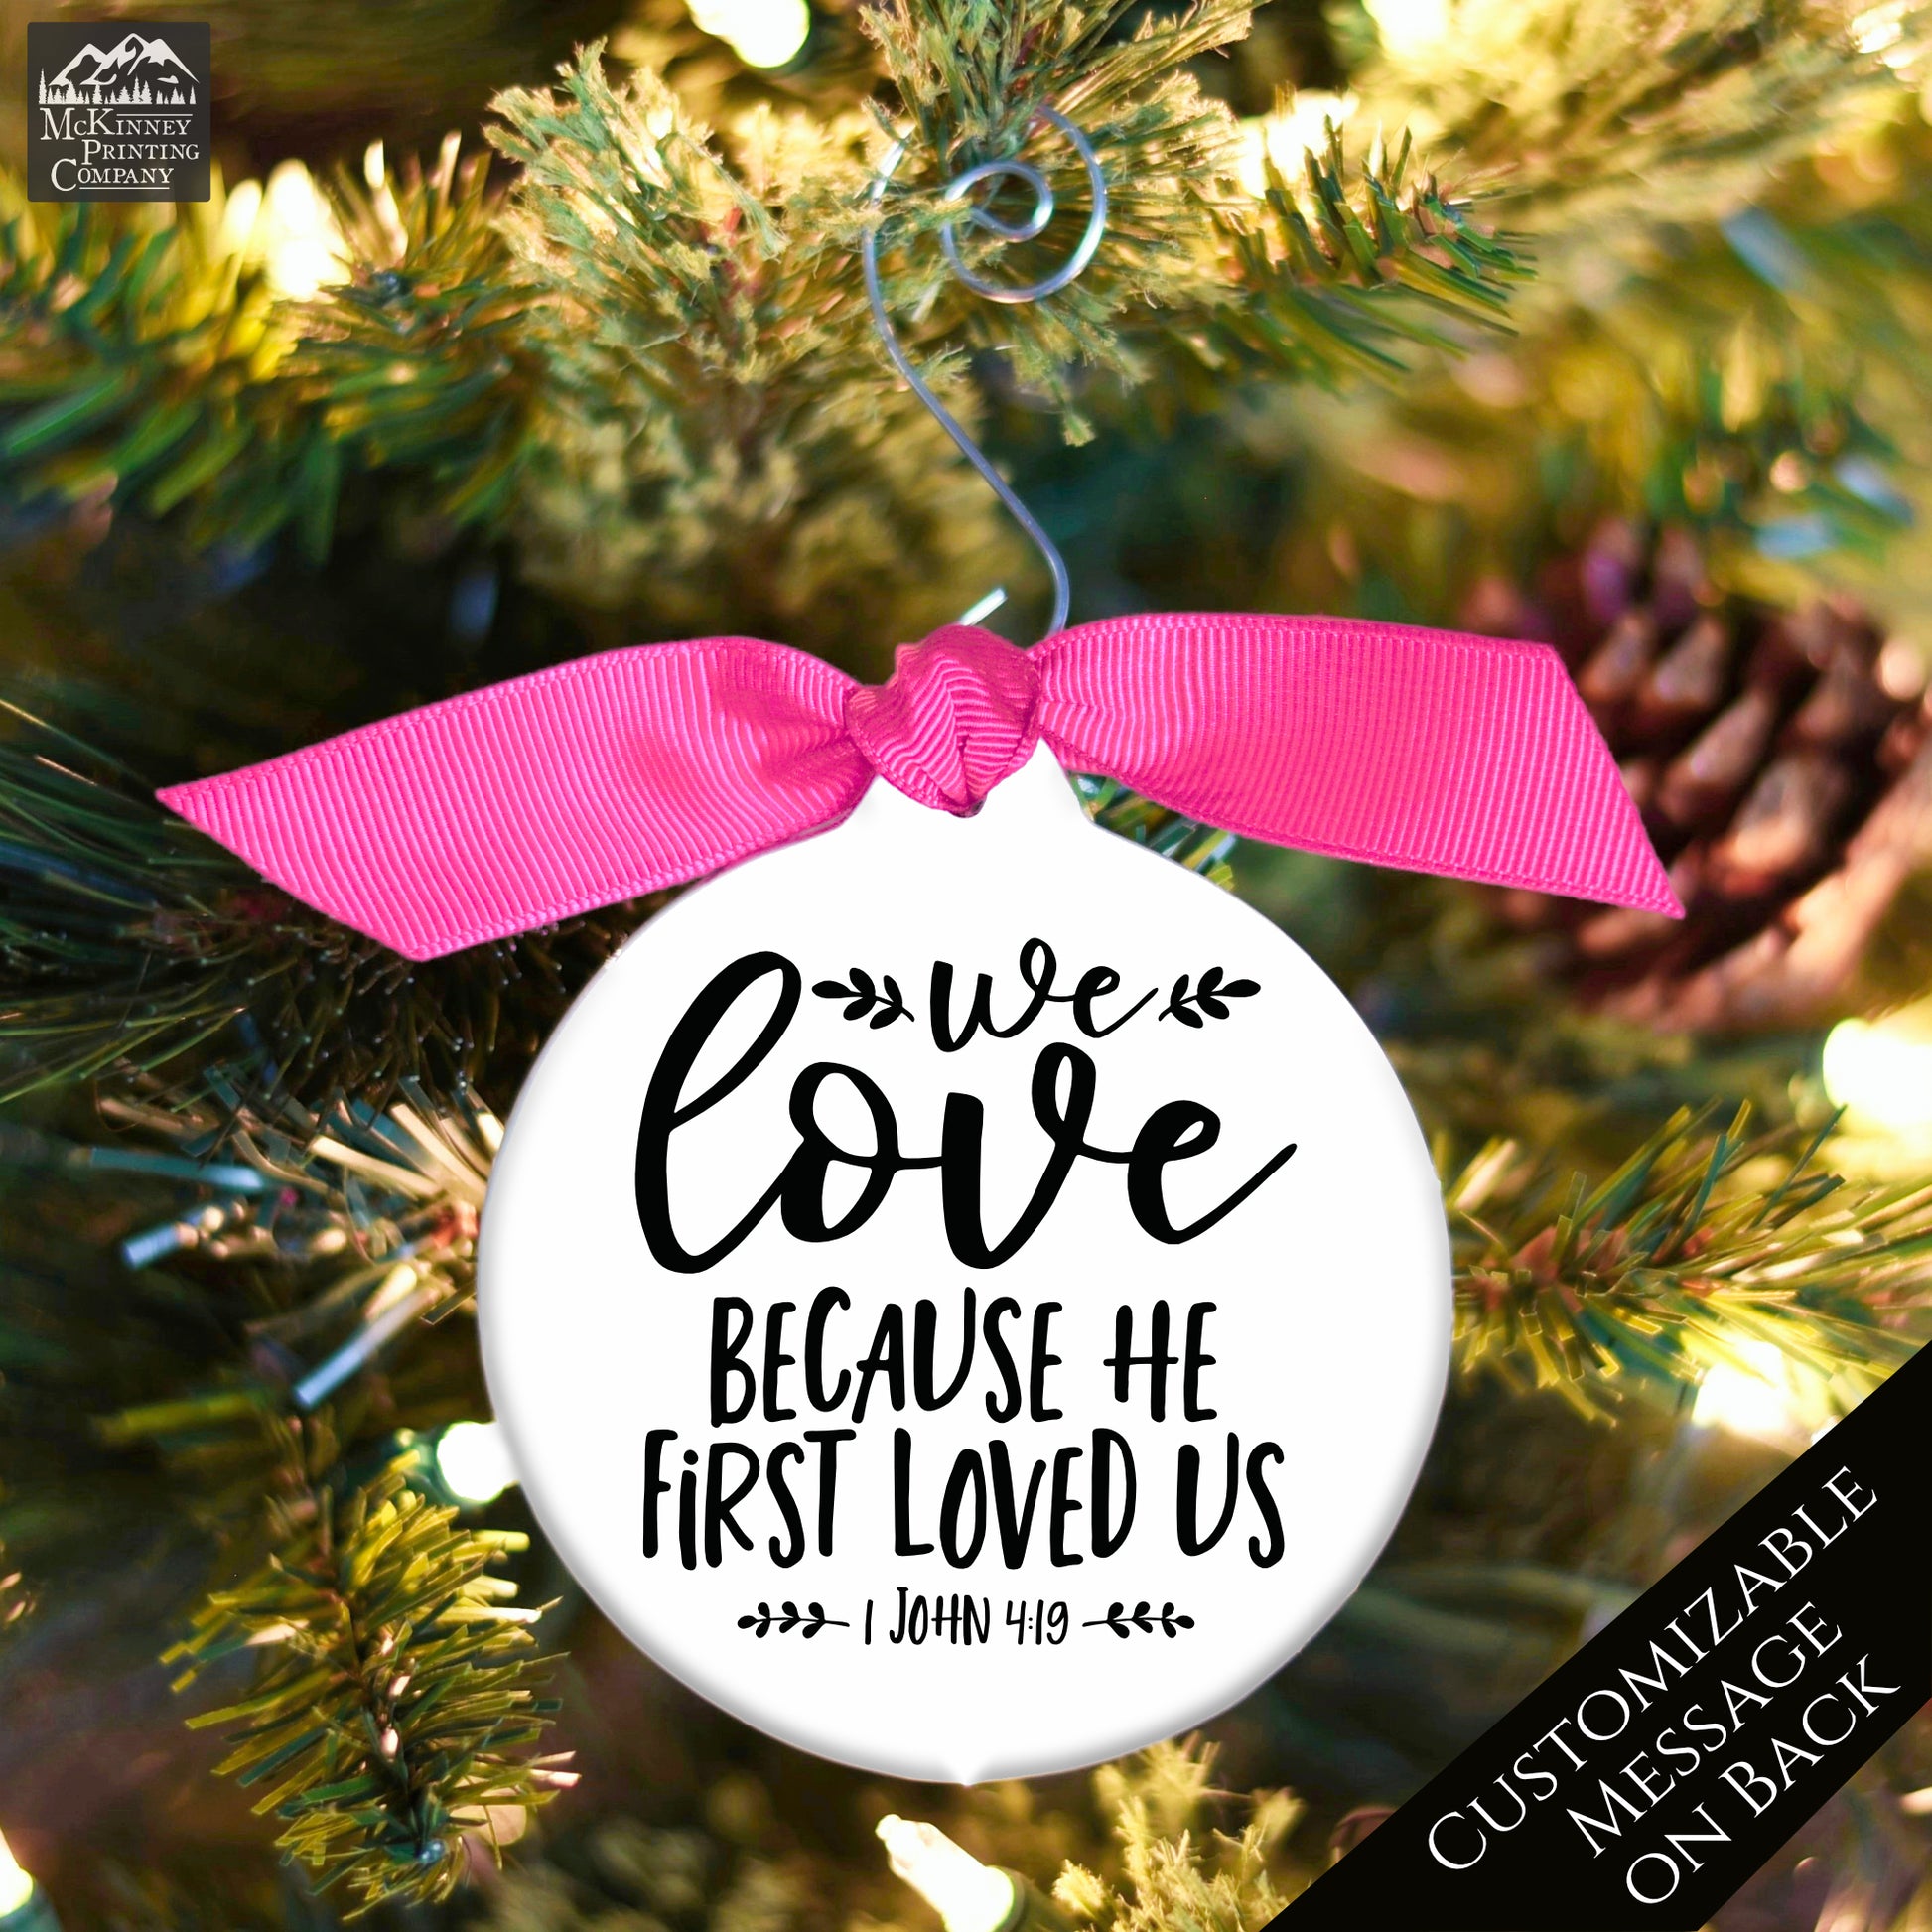 We love Because He first loved us - 1 John 4 :19 - Christmas Ornament, Tree Decor